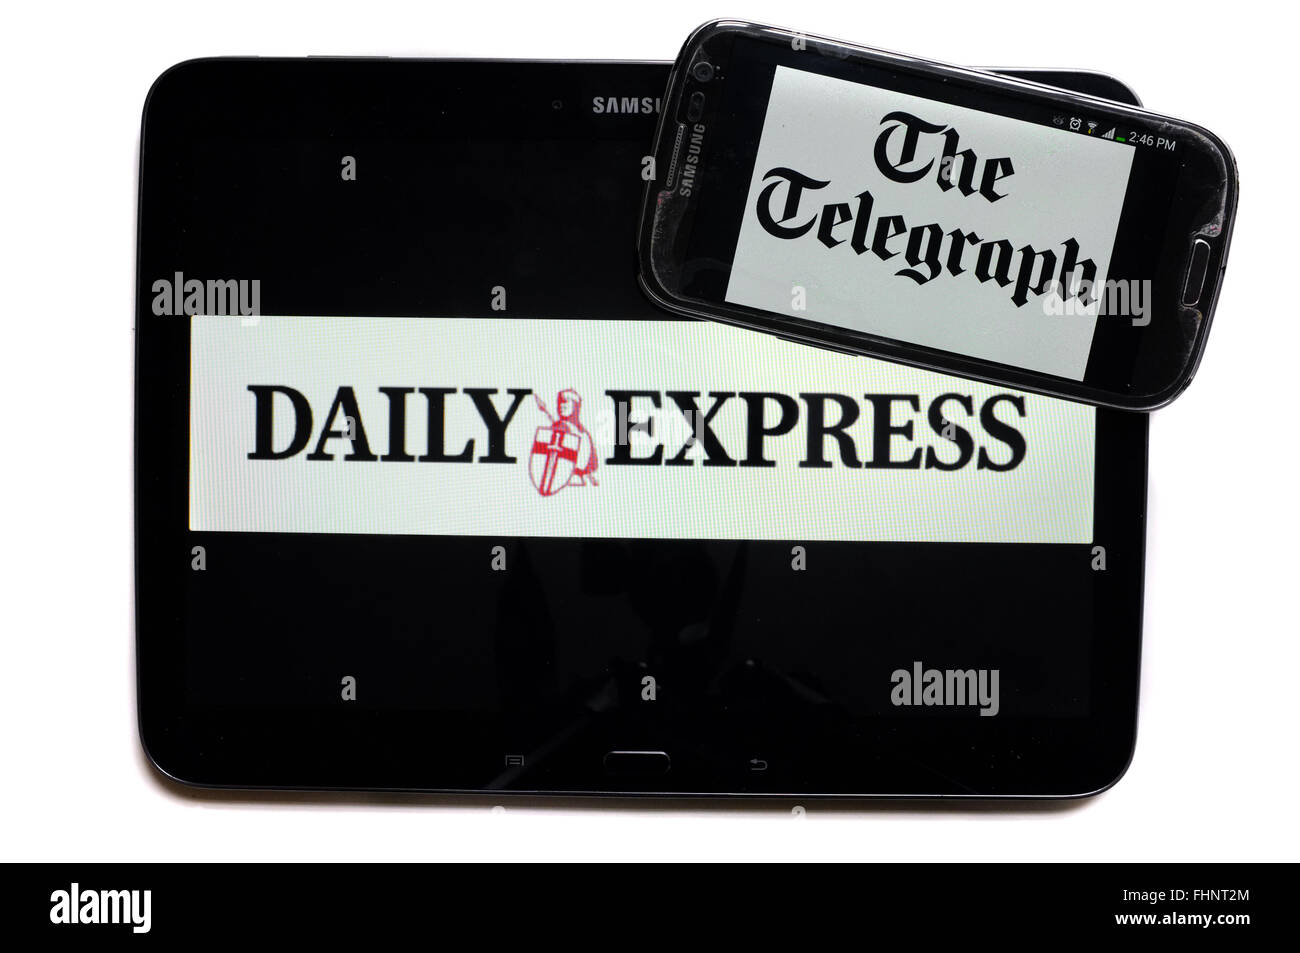 The logos of the Daily Express and The Telegraph newspapers displayed on the screens of a tablet and a smartphone. Stock Photo